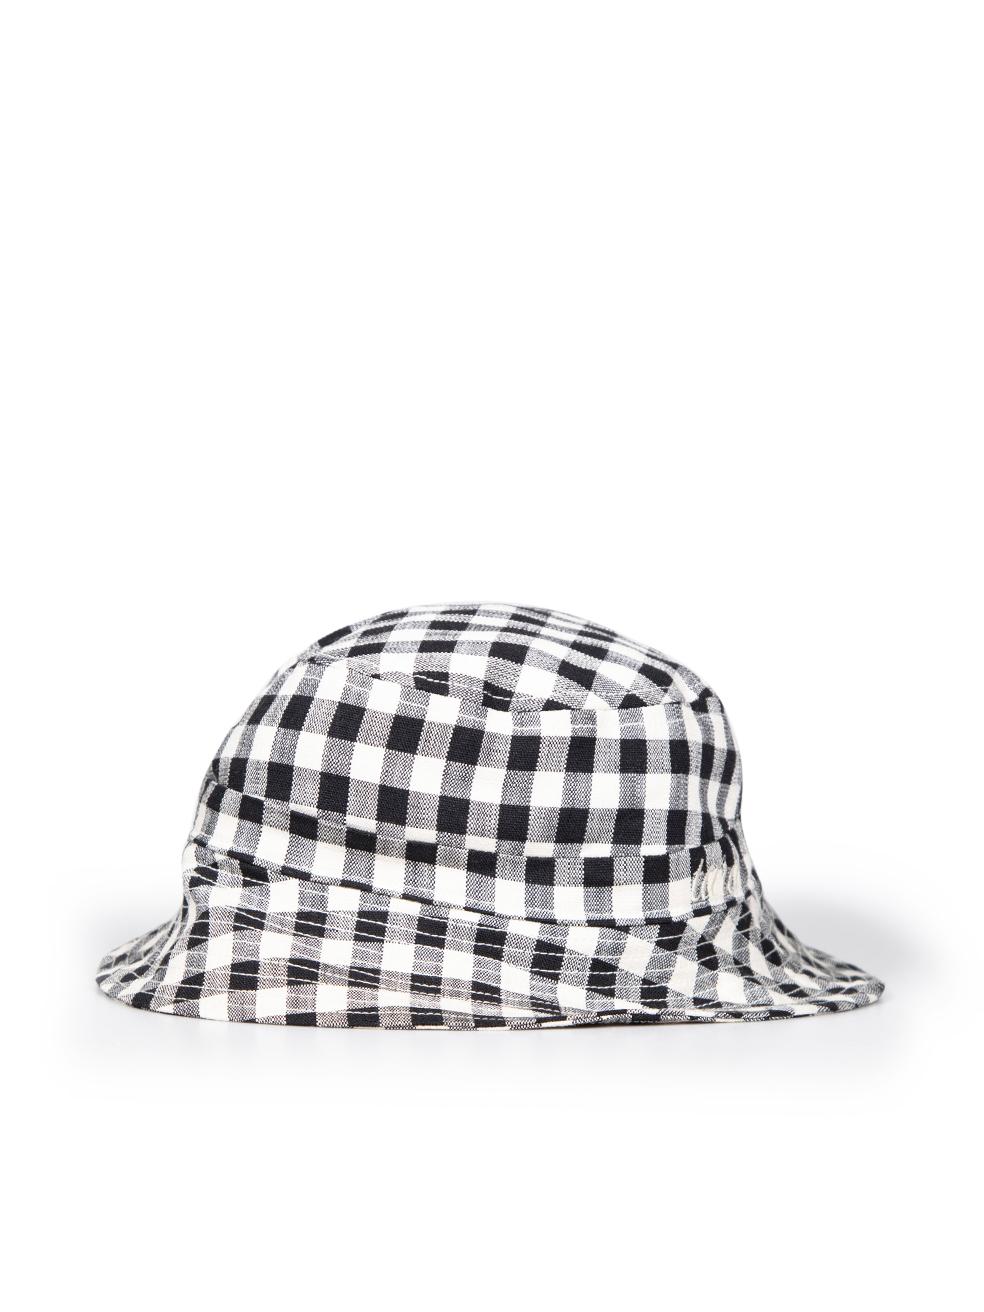 CONDITION is Very good. Minimal wear to hat is evident on this used Tara Jarmon designer resale item. This hat comes with original dust bag.
 
 Details
 Black and white
 Viscose
 Bucket hat
 Gingham pattern
 Embroidered logo detail
 
 
 Made in